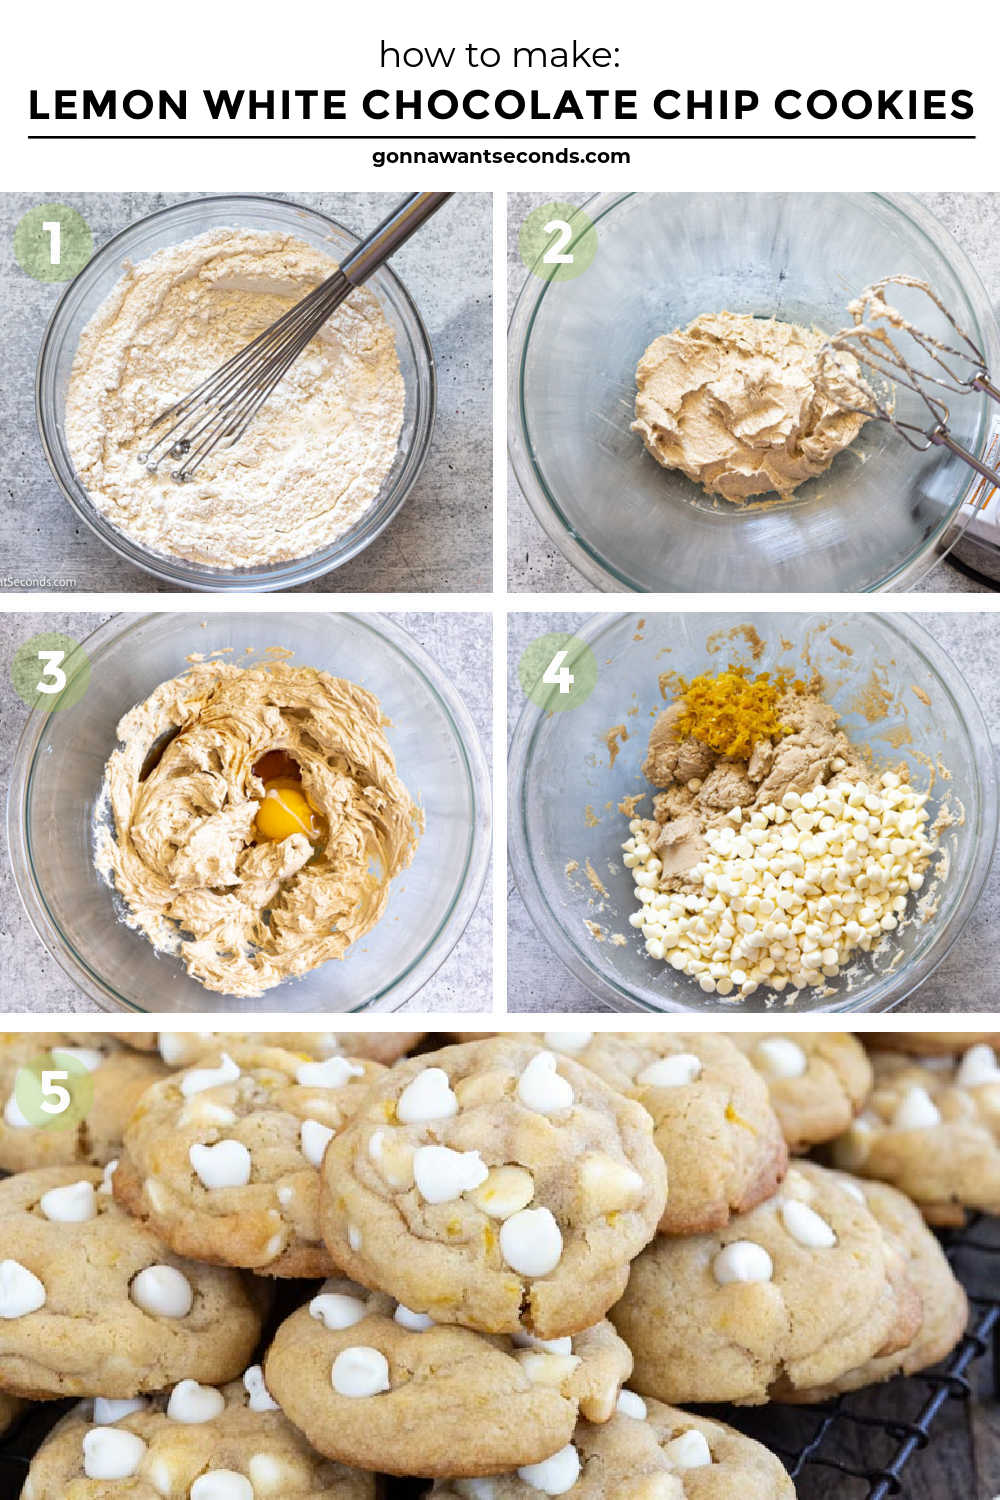 Step by step how to make lemon white chocolate chip cookies